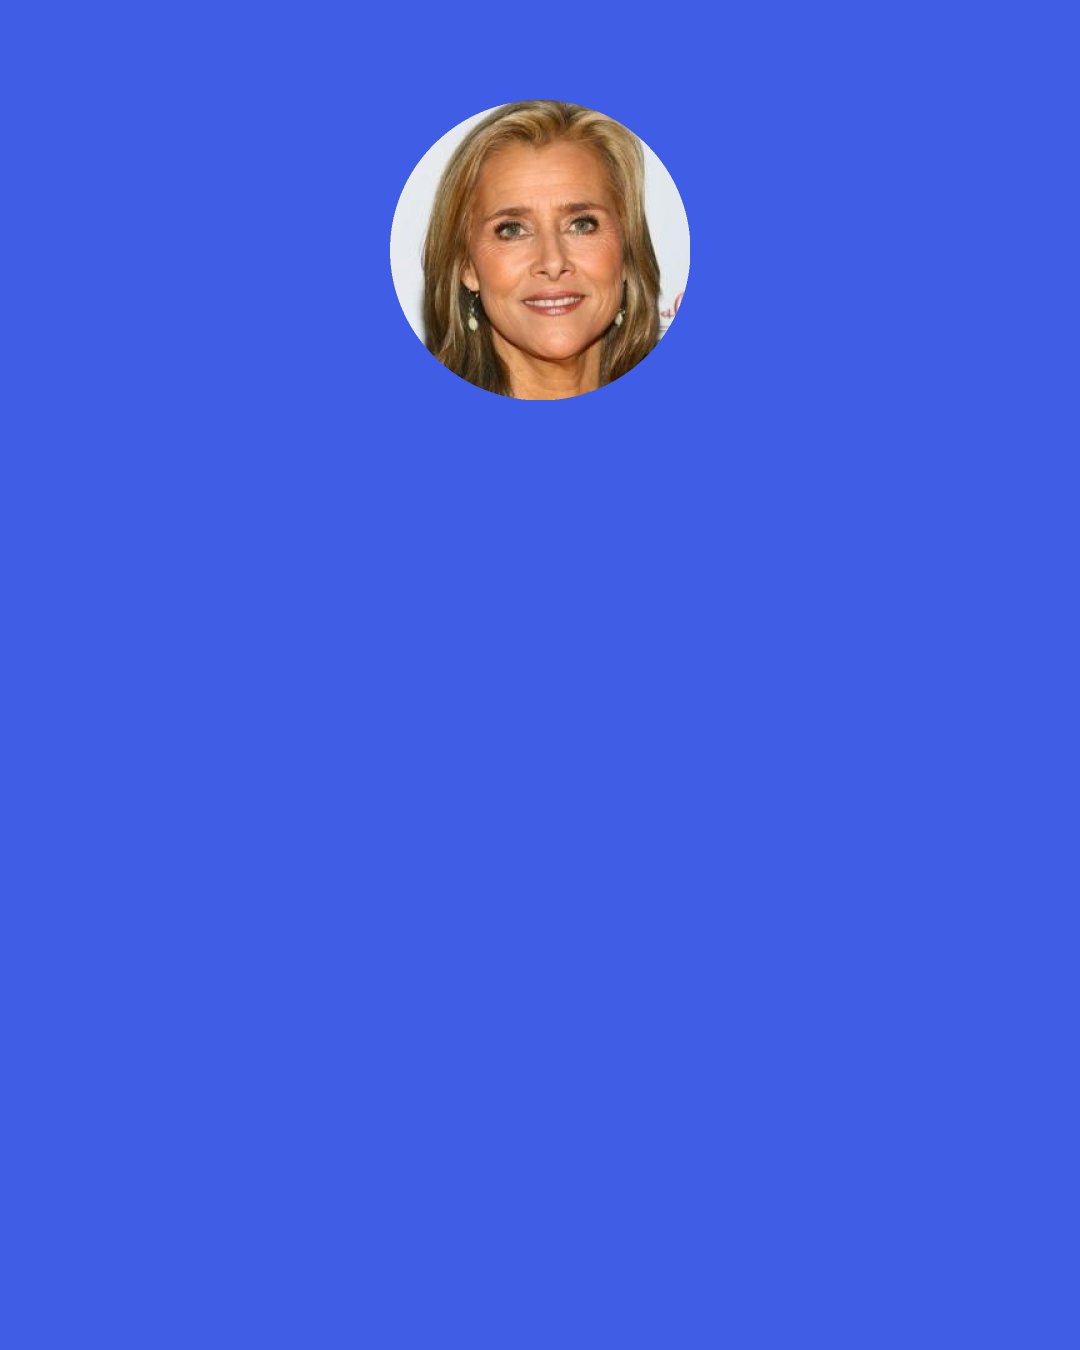 Meredith Vieira: I feel I always have to work harder, I have to impress all the time. Impress whom? With what? People say, "Just be yourself." Well, my anxiety is that people aren't going to want that.